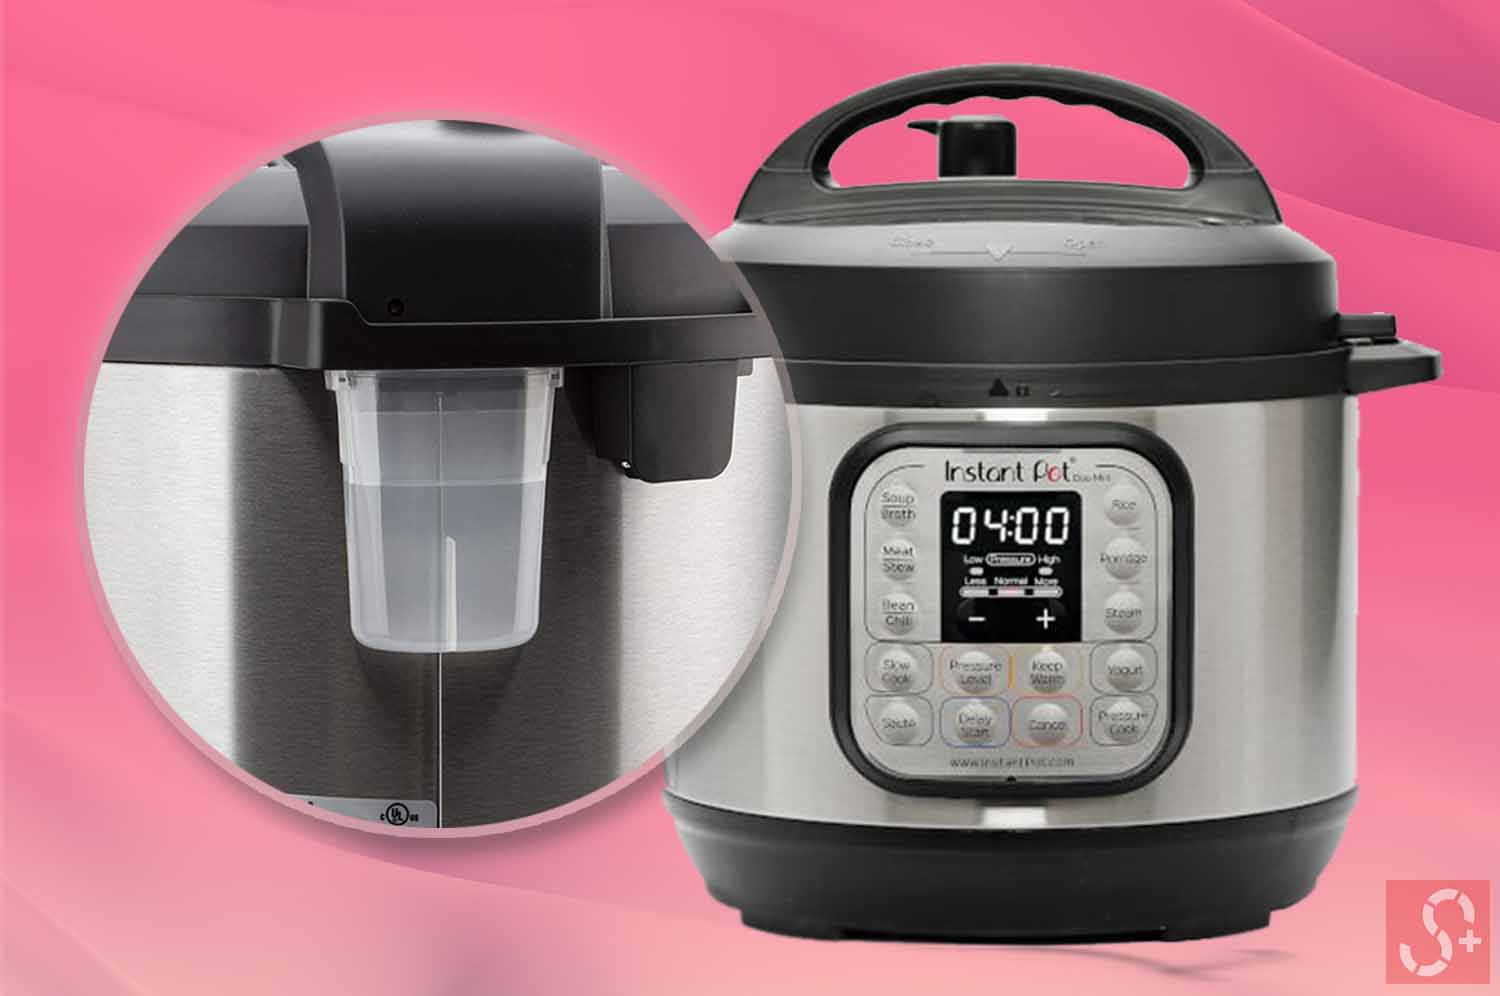 Condensation Collector of an Instant Pot in front of pink background